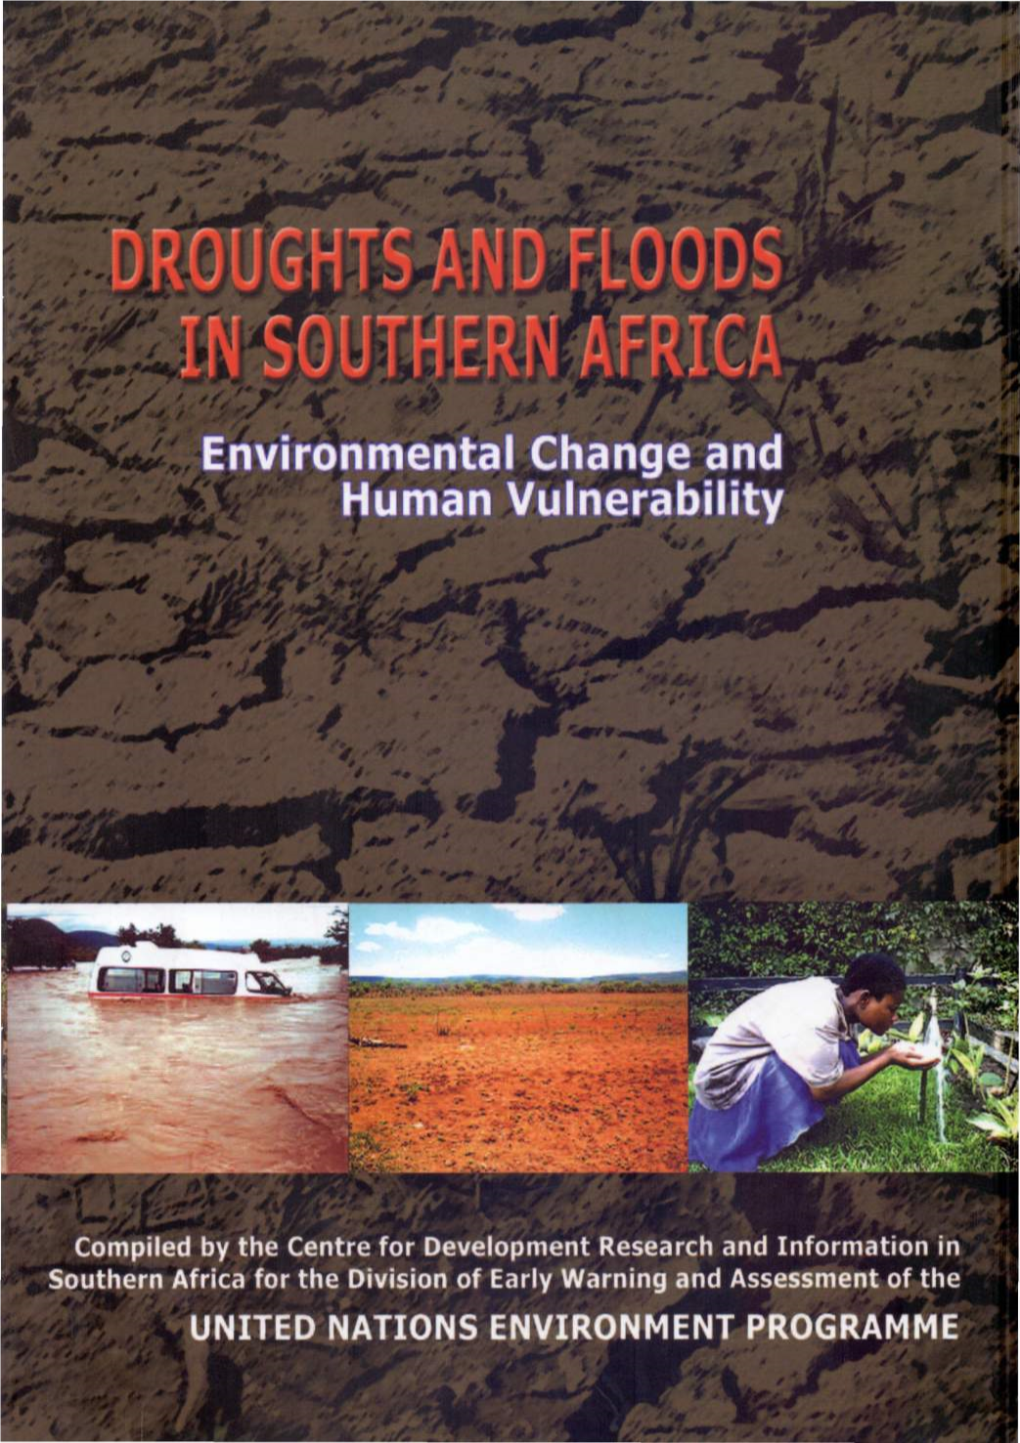 Impact of Droughts and Floods